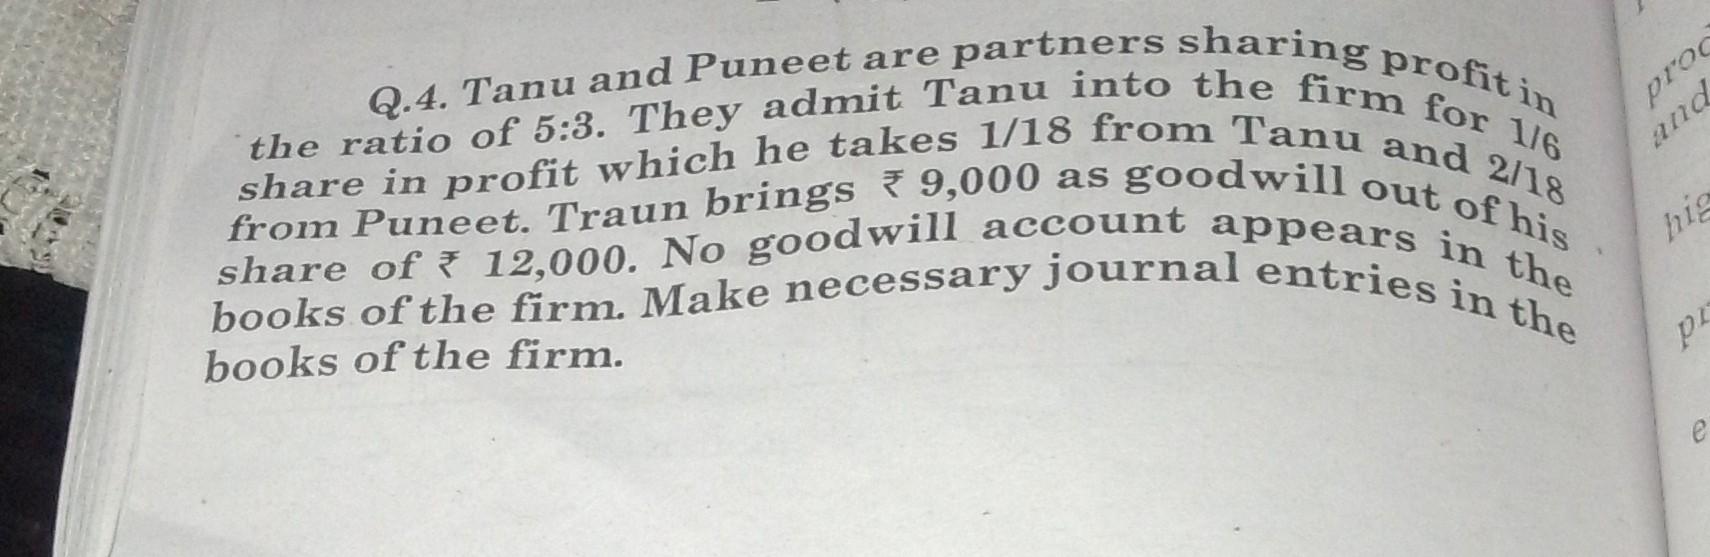 the ratio of 5:3. They admit Tanu into the firm for 1/6 share in profit which he takes 1/18 from Tanu and